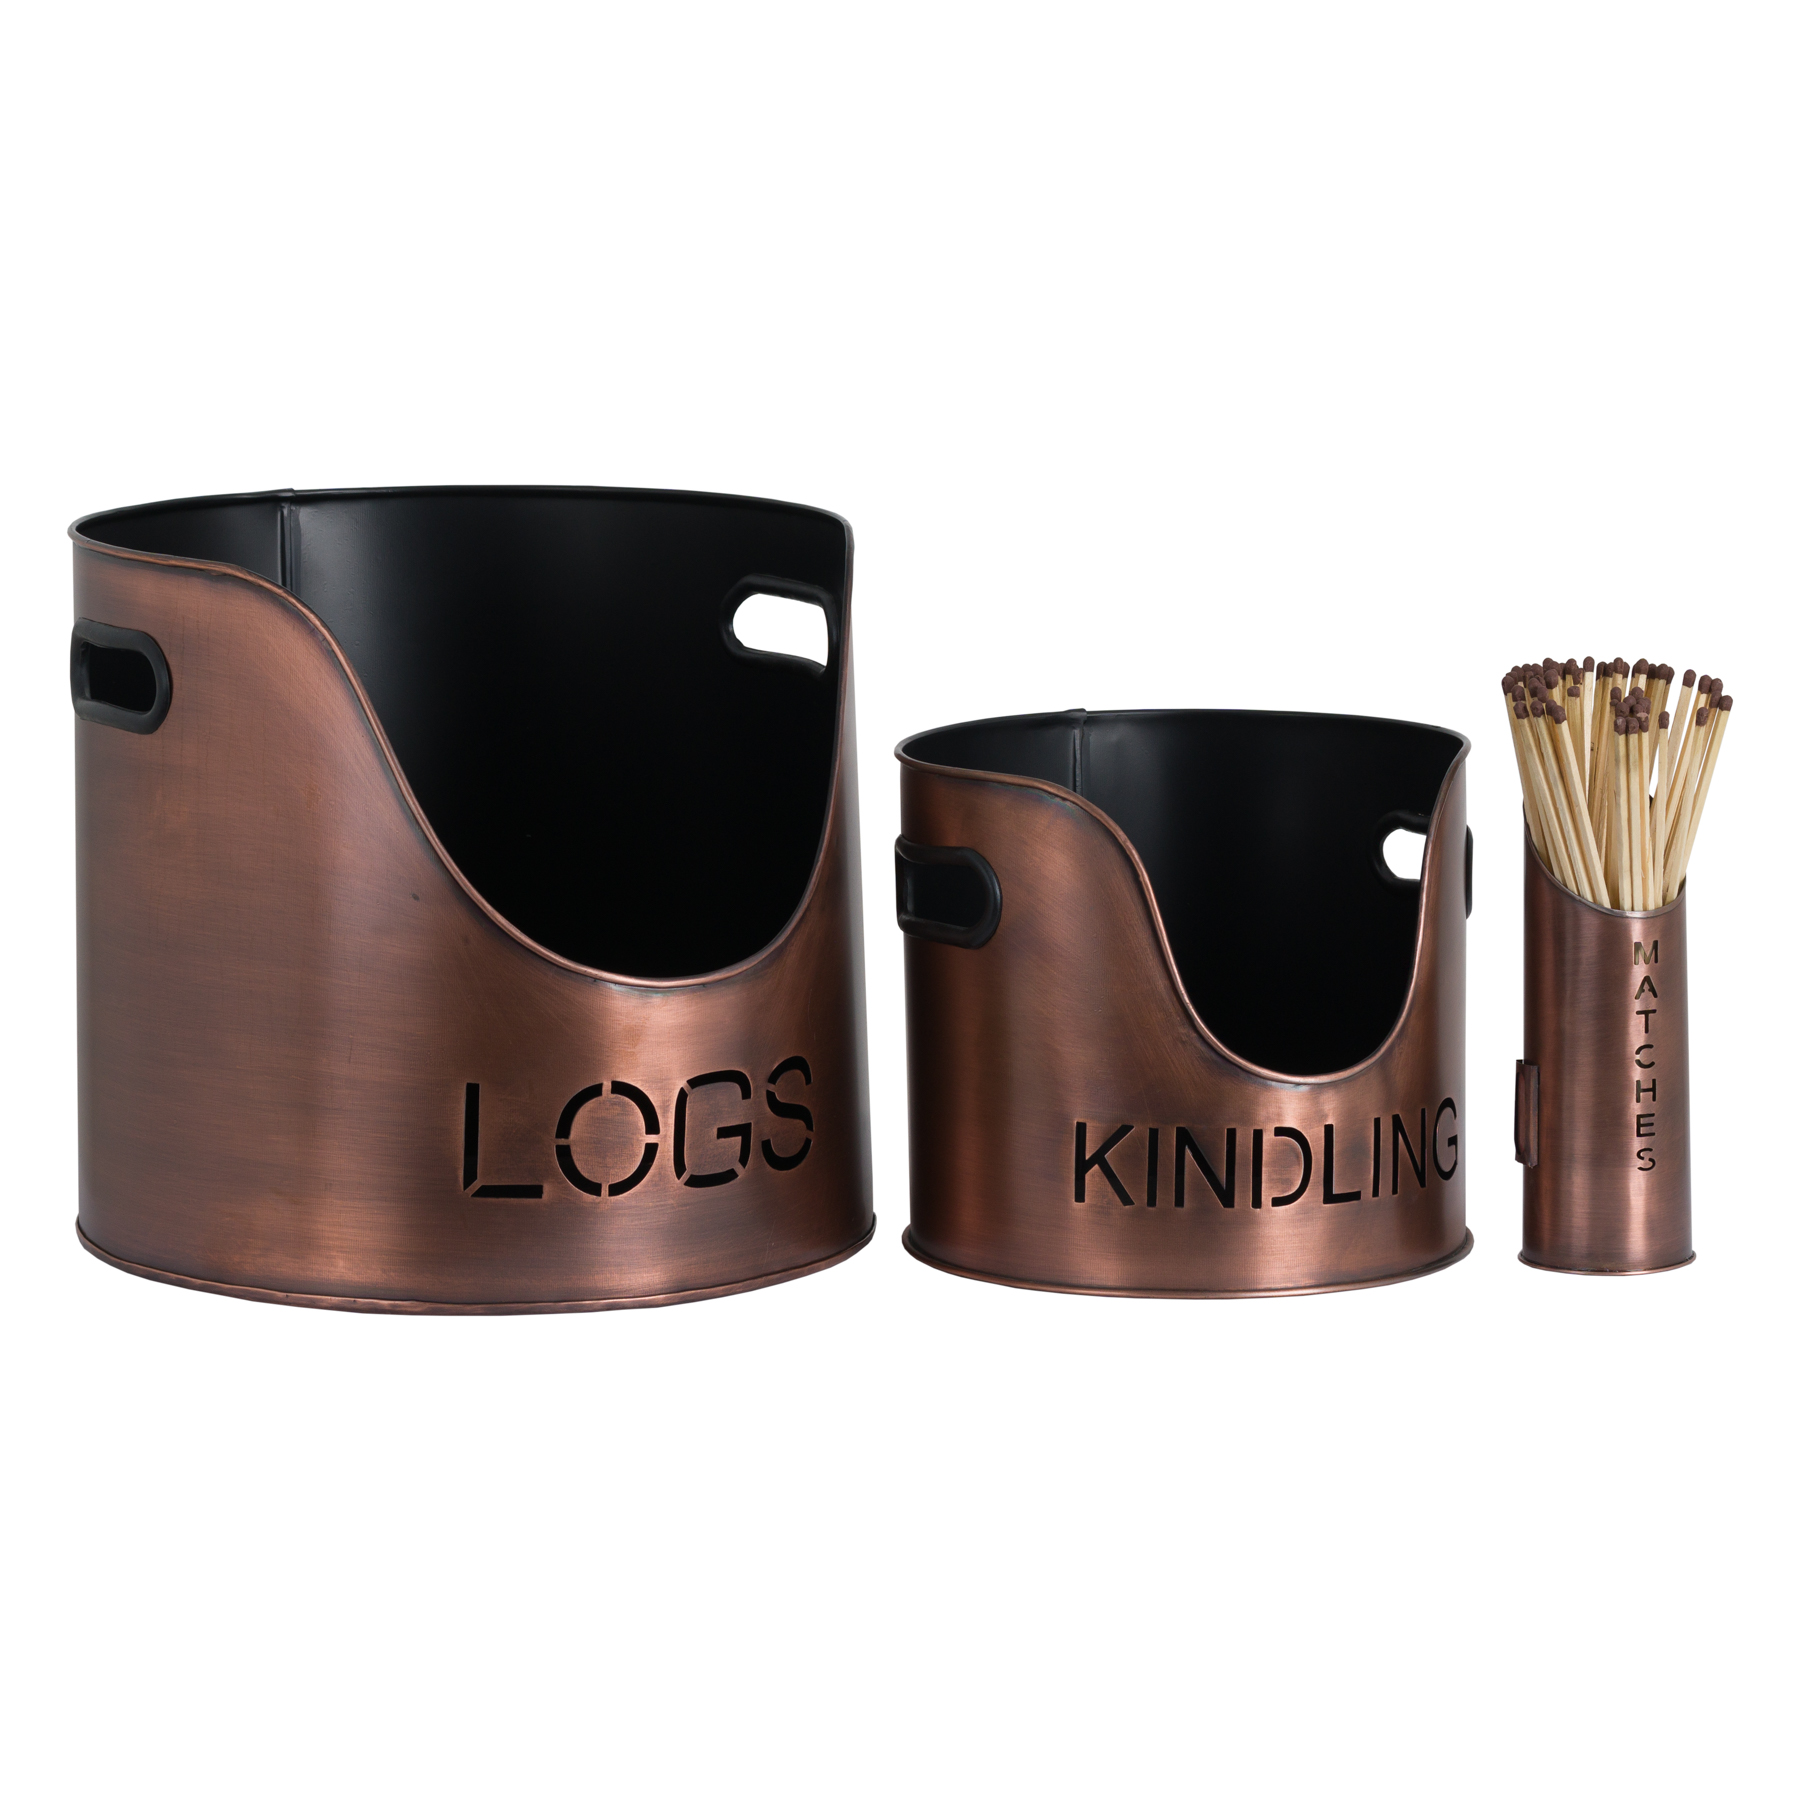 Copper Finish Logs And Kindling Buckets & Matchstick Holder - Image 1